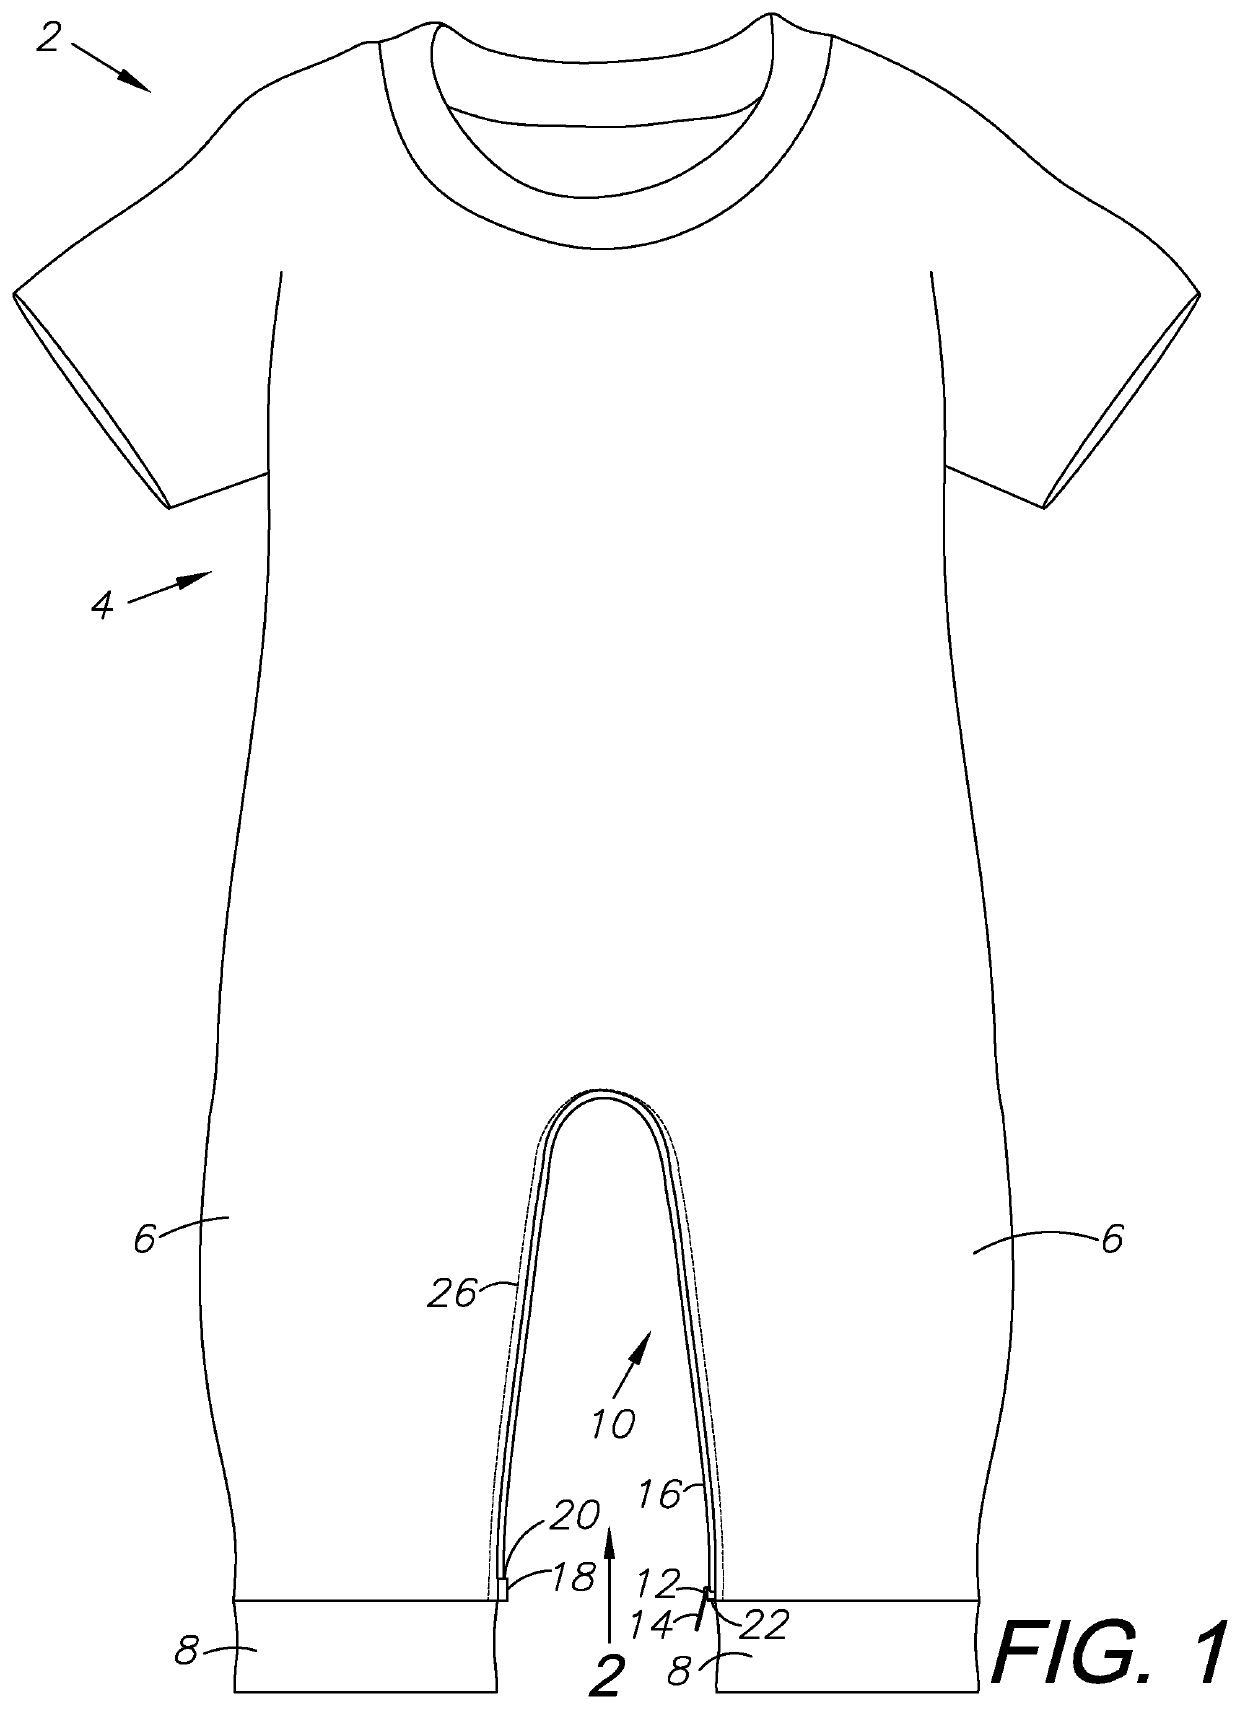 Child clothing device with reinforced zipper access, method of use, and method of manufacture